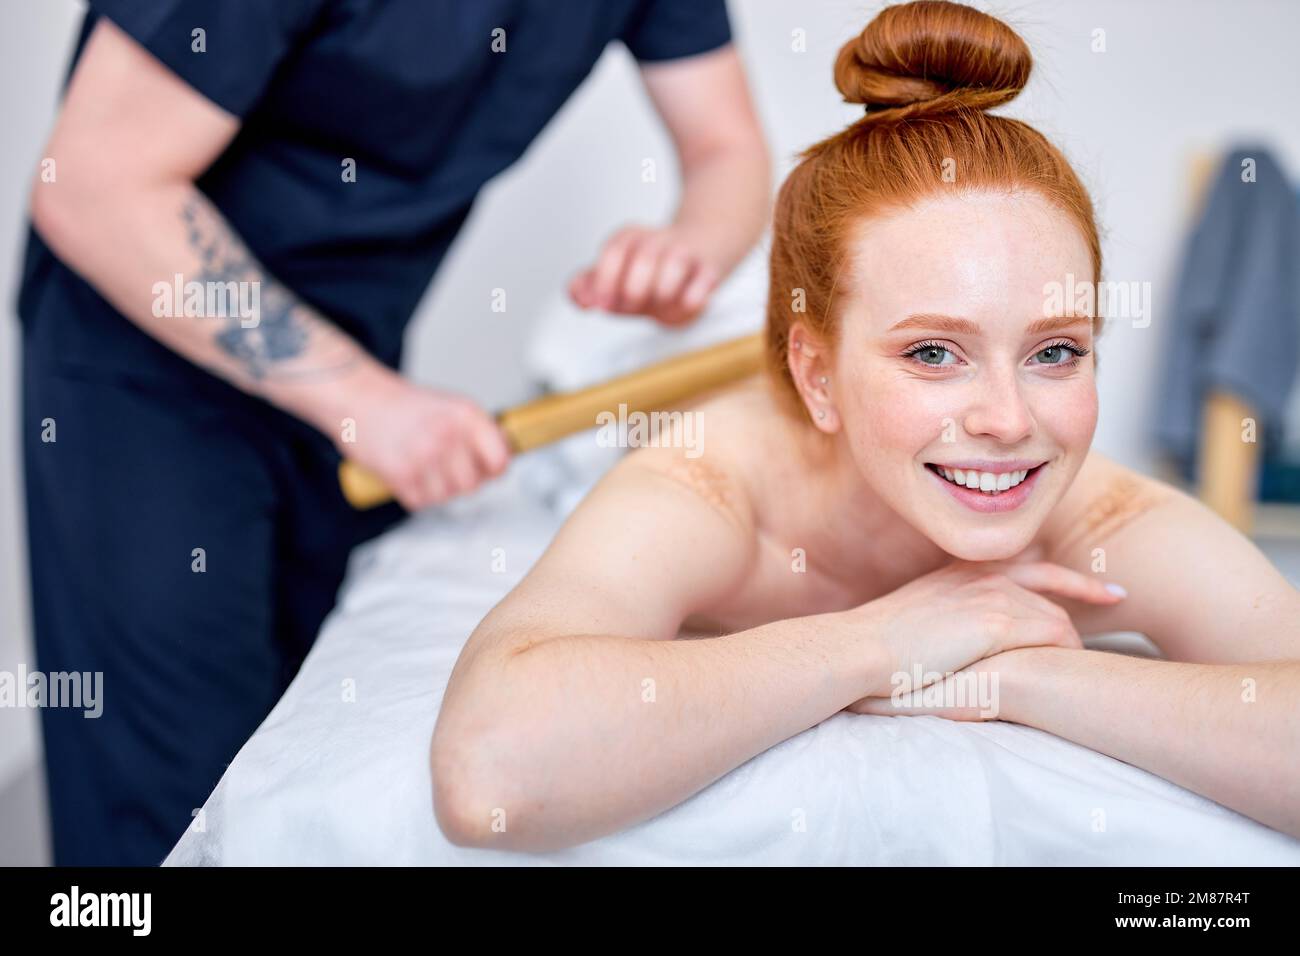 unrecognizable professional masseur massaging back of pleased client with bamboo stick, focus on redhead female client lying on bed couch, smiling, ha Stock Photo